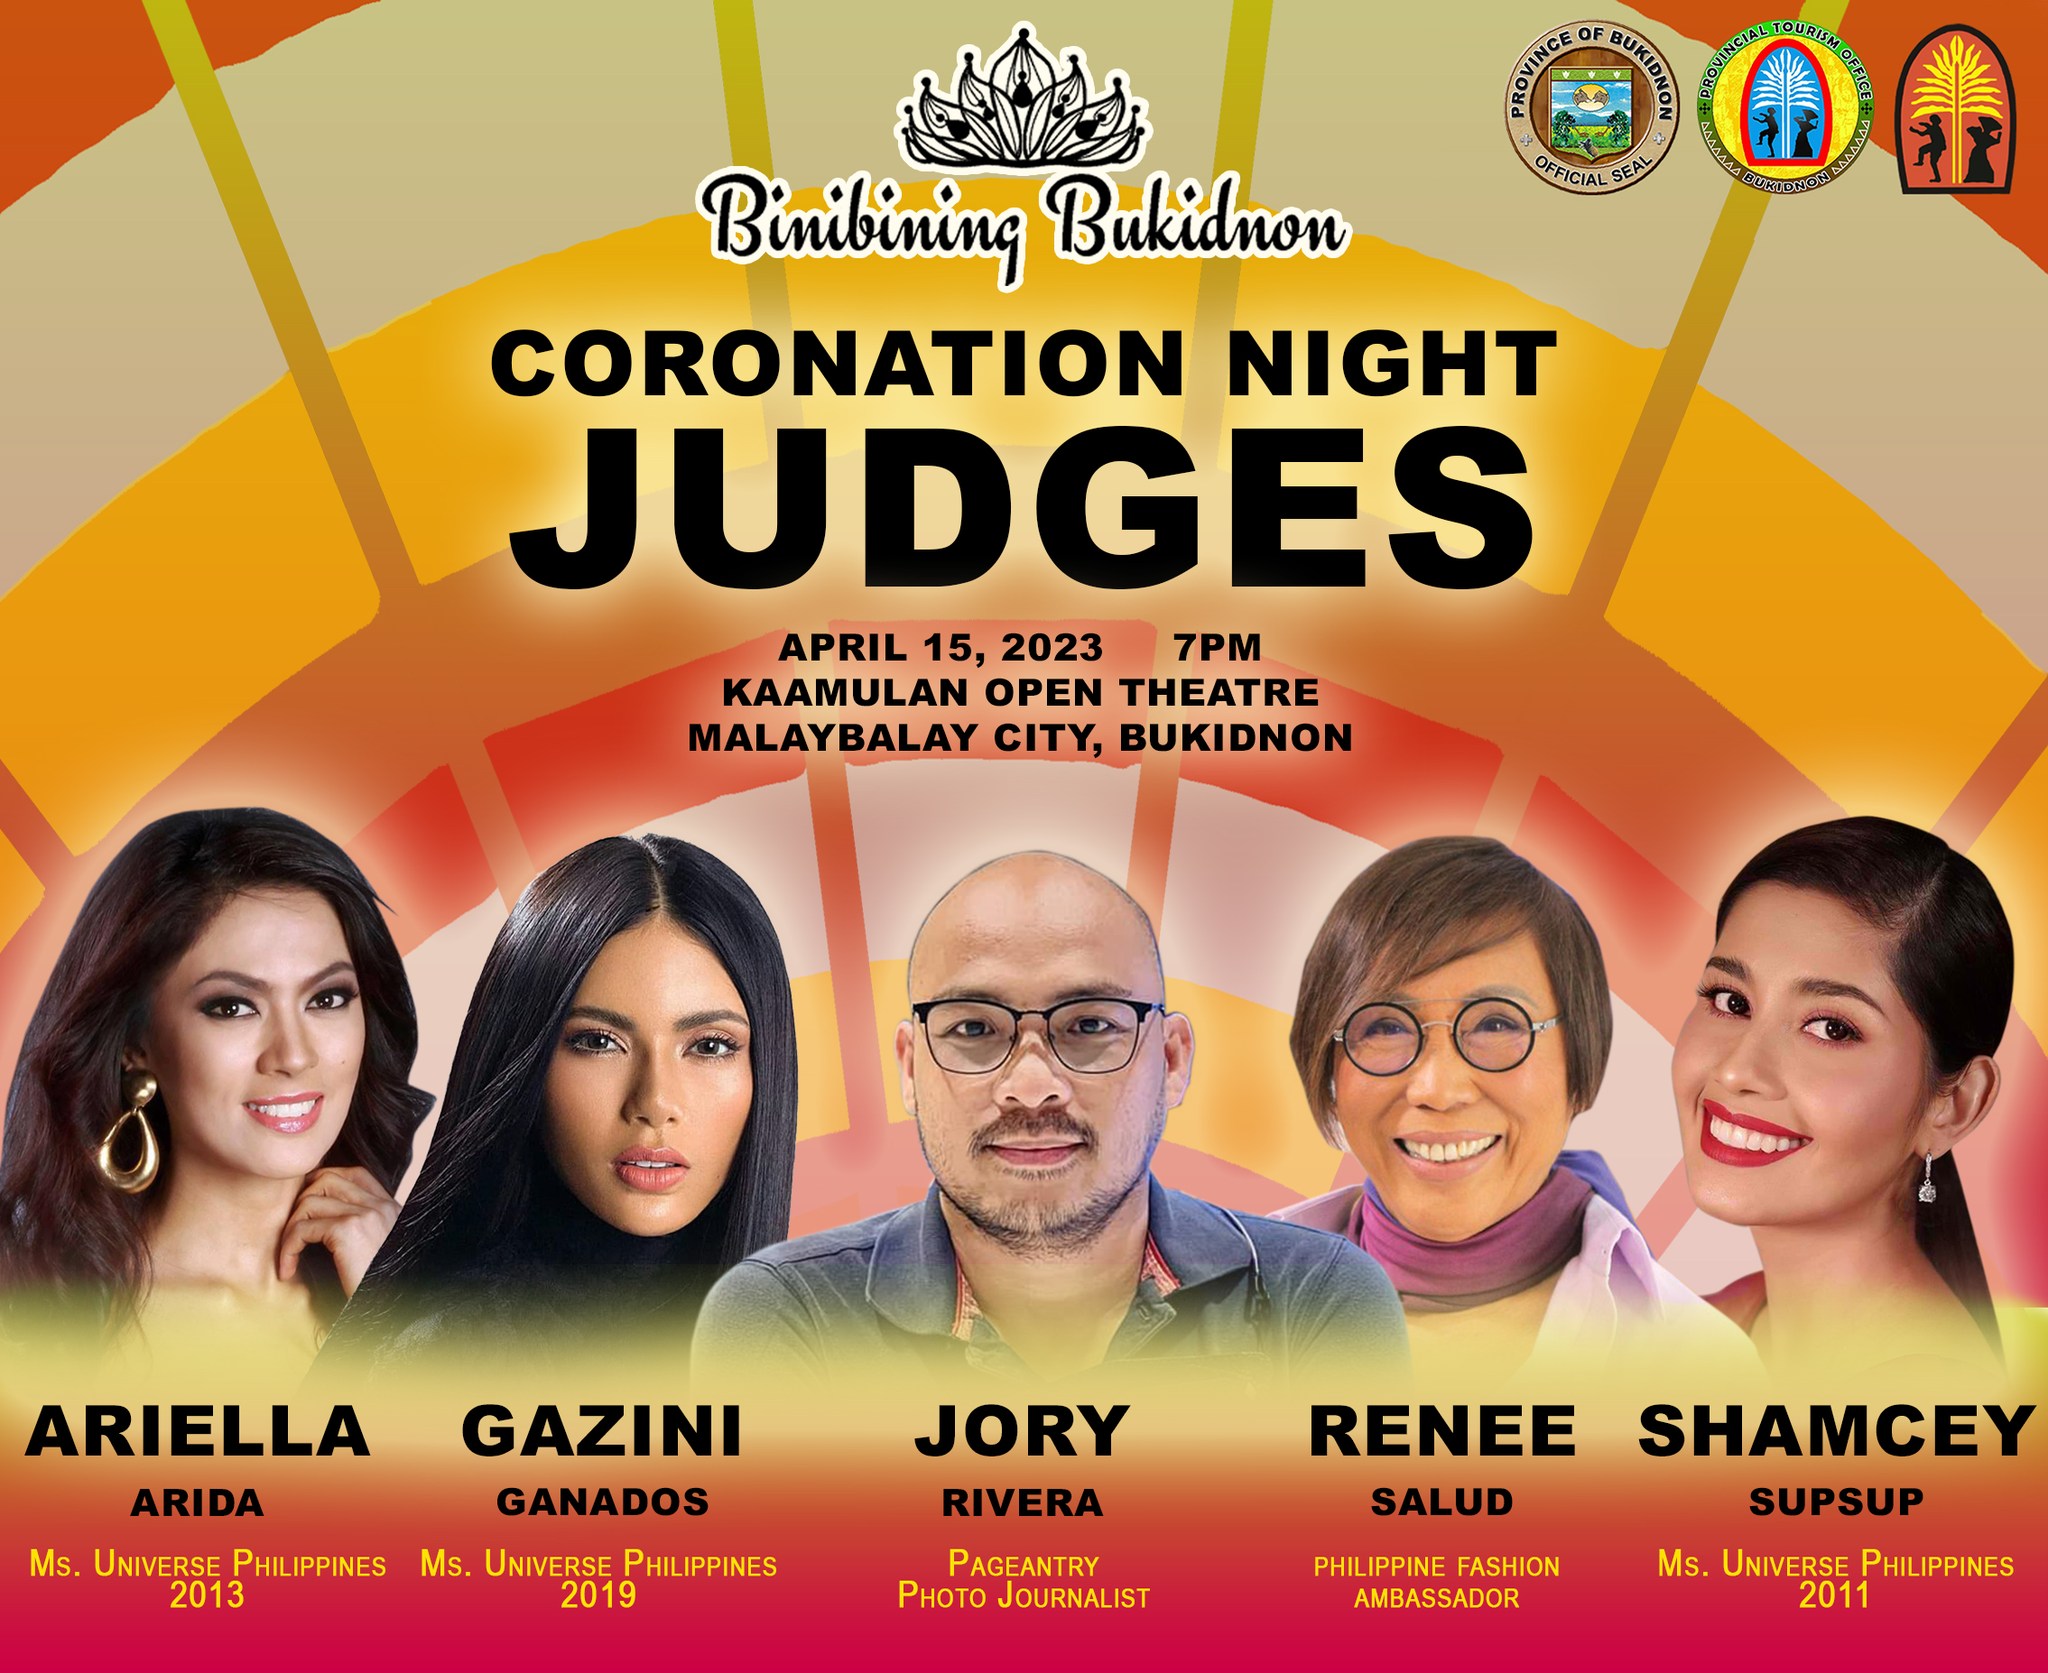 These beauty queens are among the judges of Binibining Bukidnon 2023